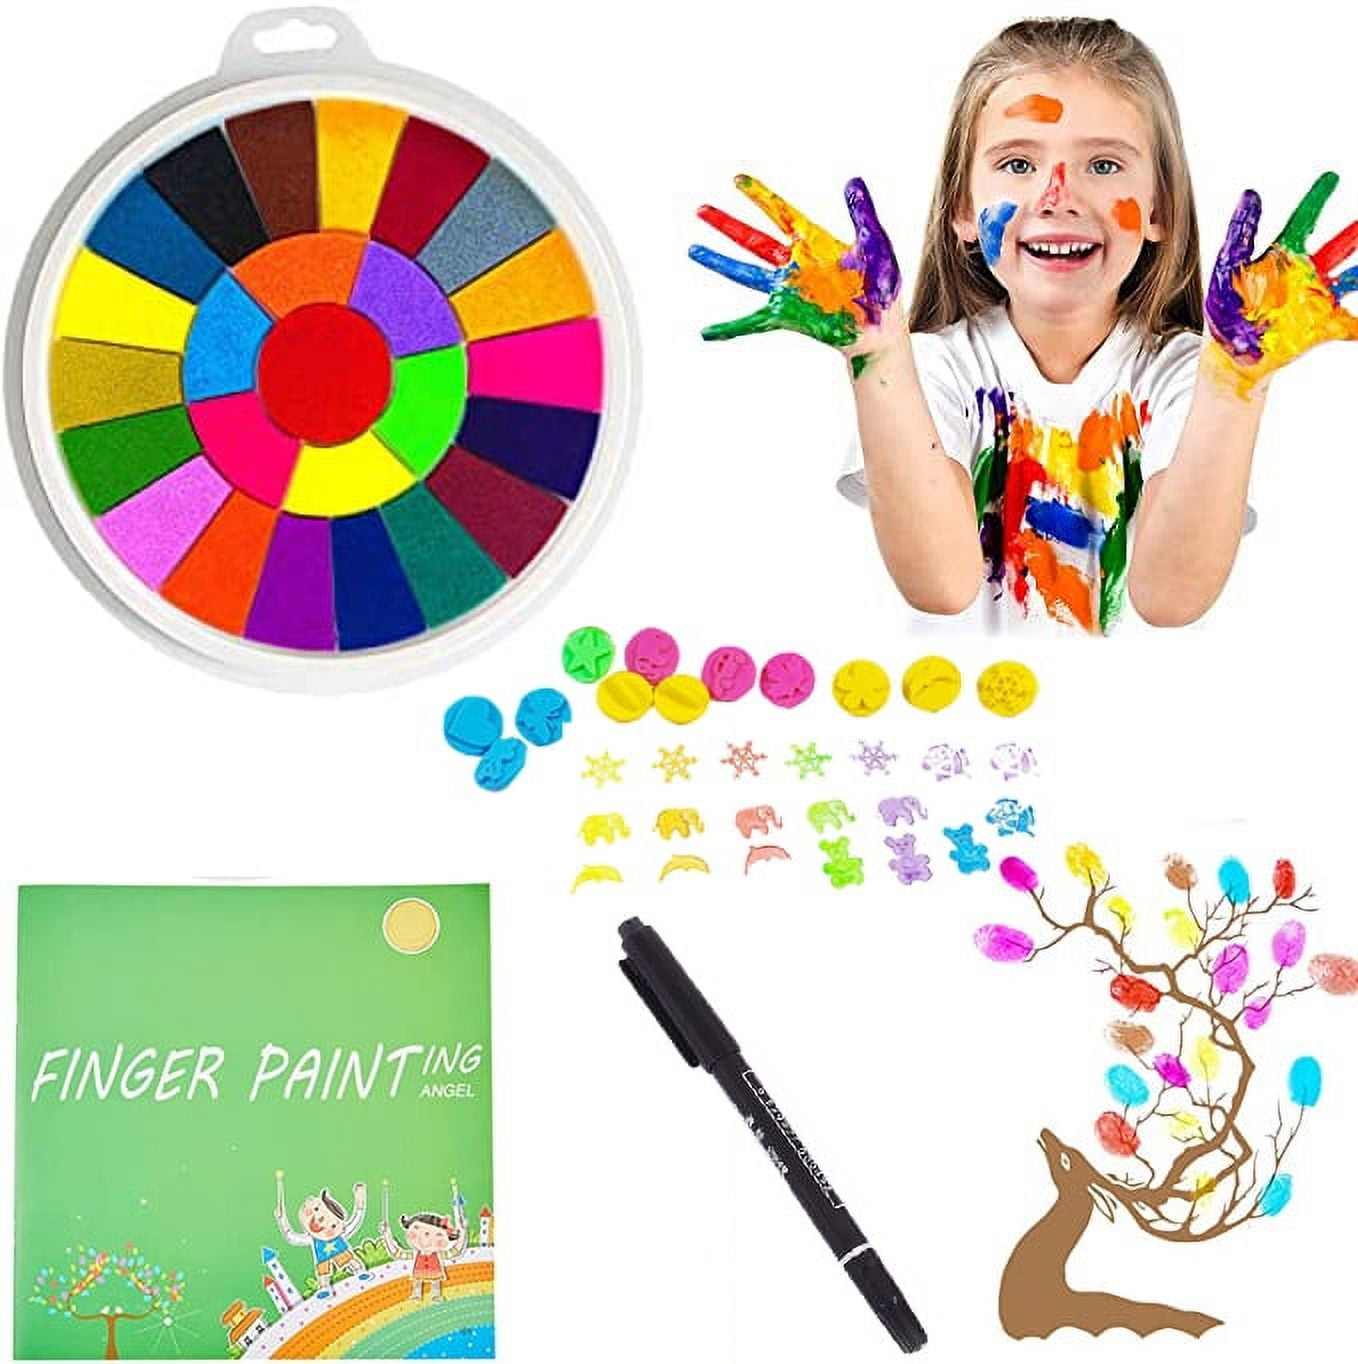 Funny Finger Painting Kit and Book - 12 Color Finger Painting Kit for Kids  Ages 4-8, Finger Drawing Crafts Mud Painting Kit for Painting DIY Crafts